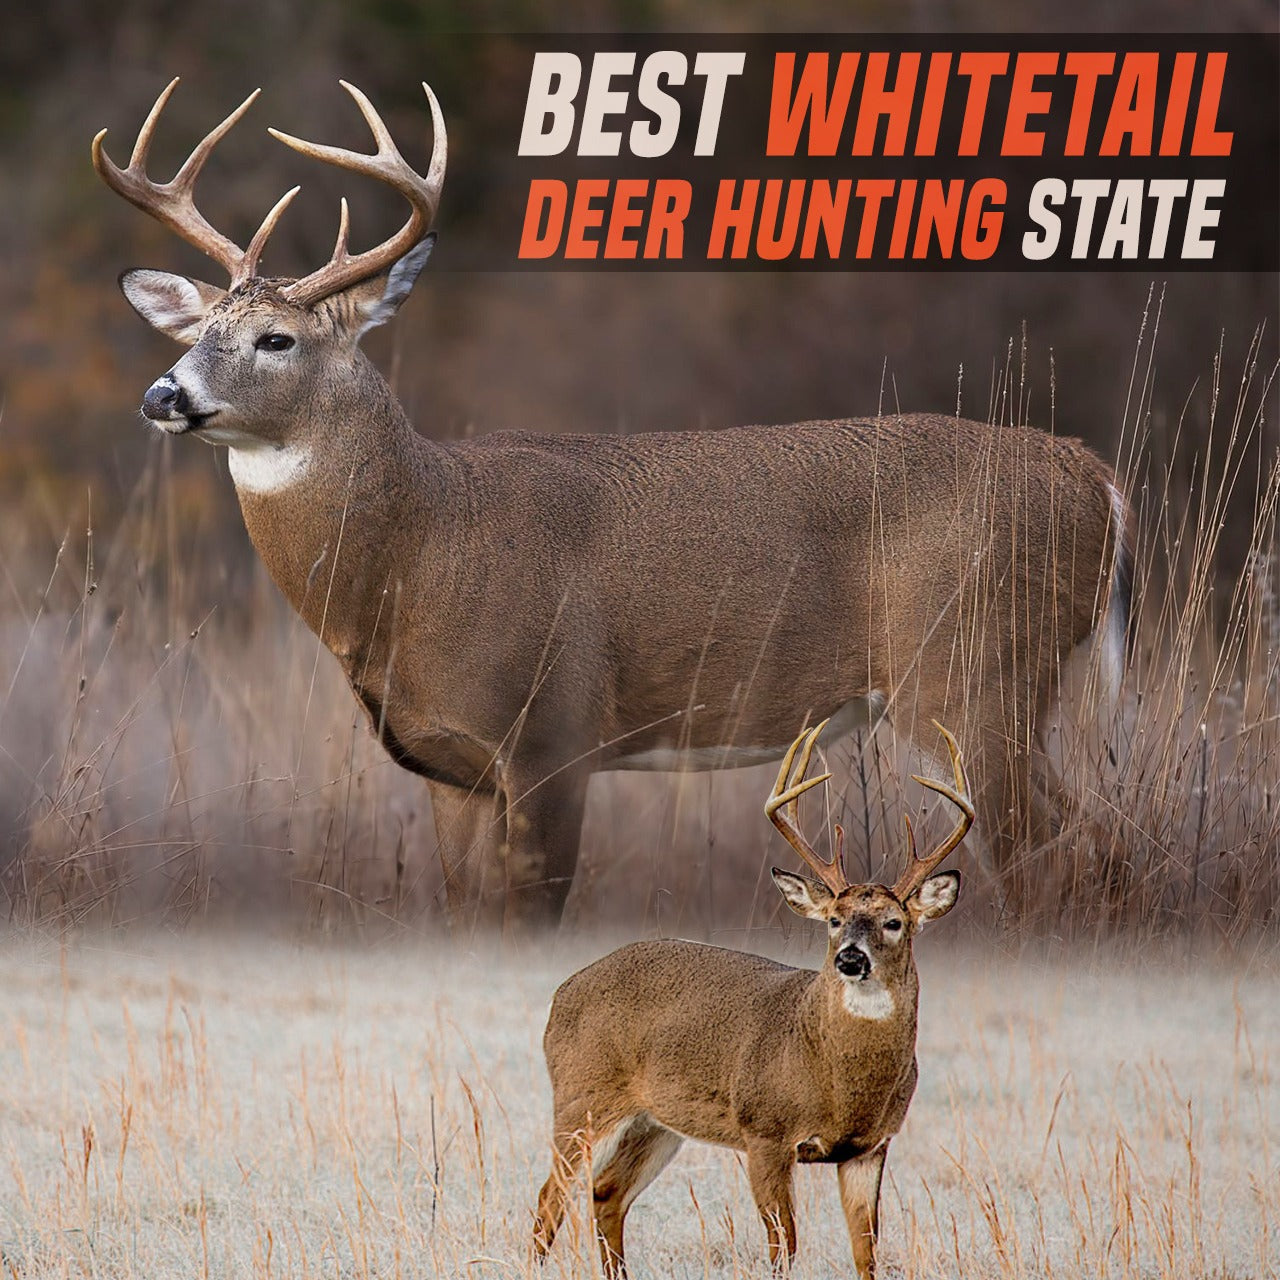 Best Whitetail Deer Hunting States